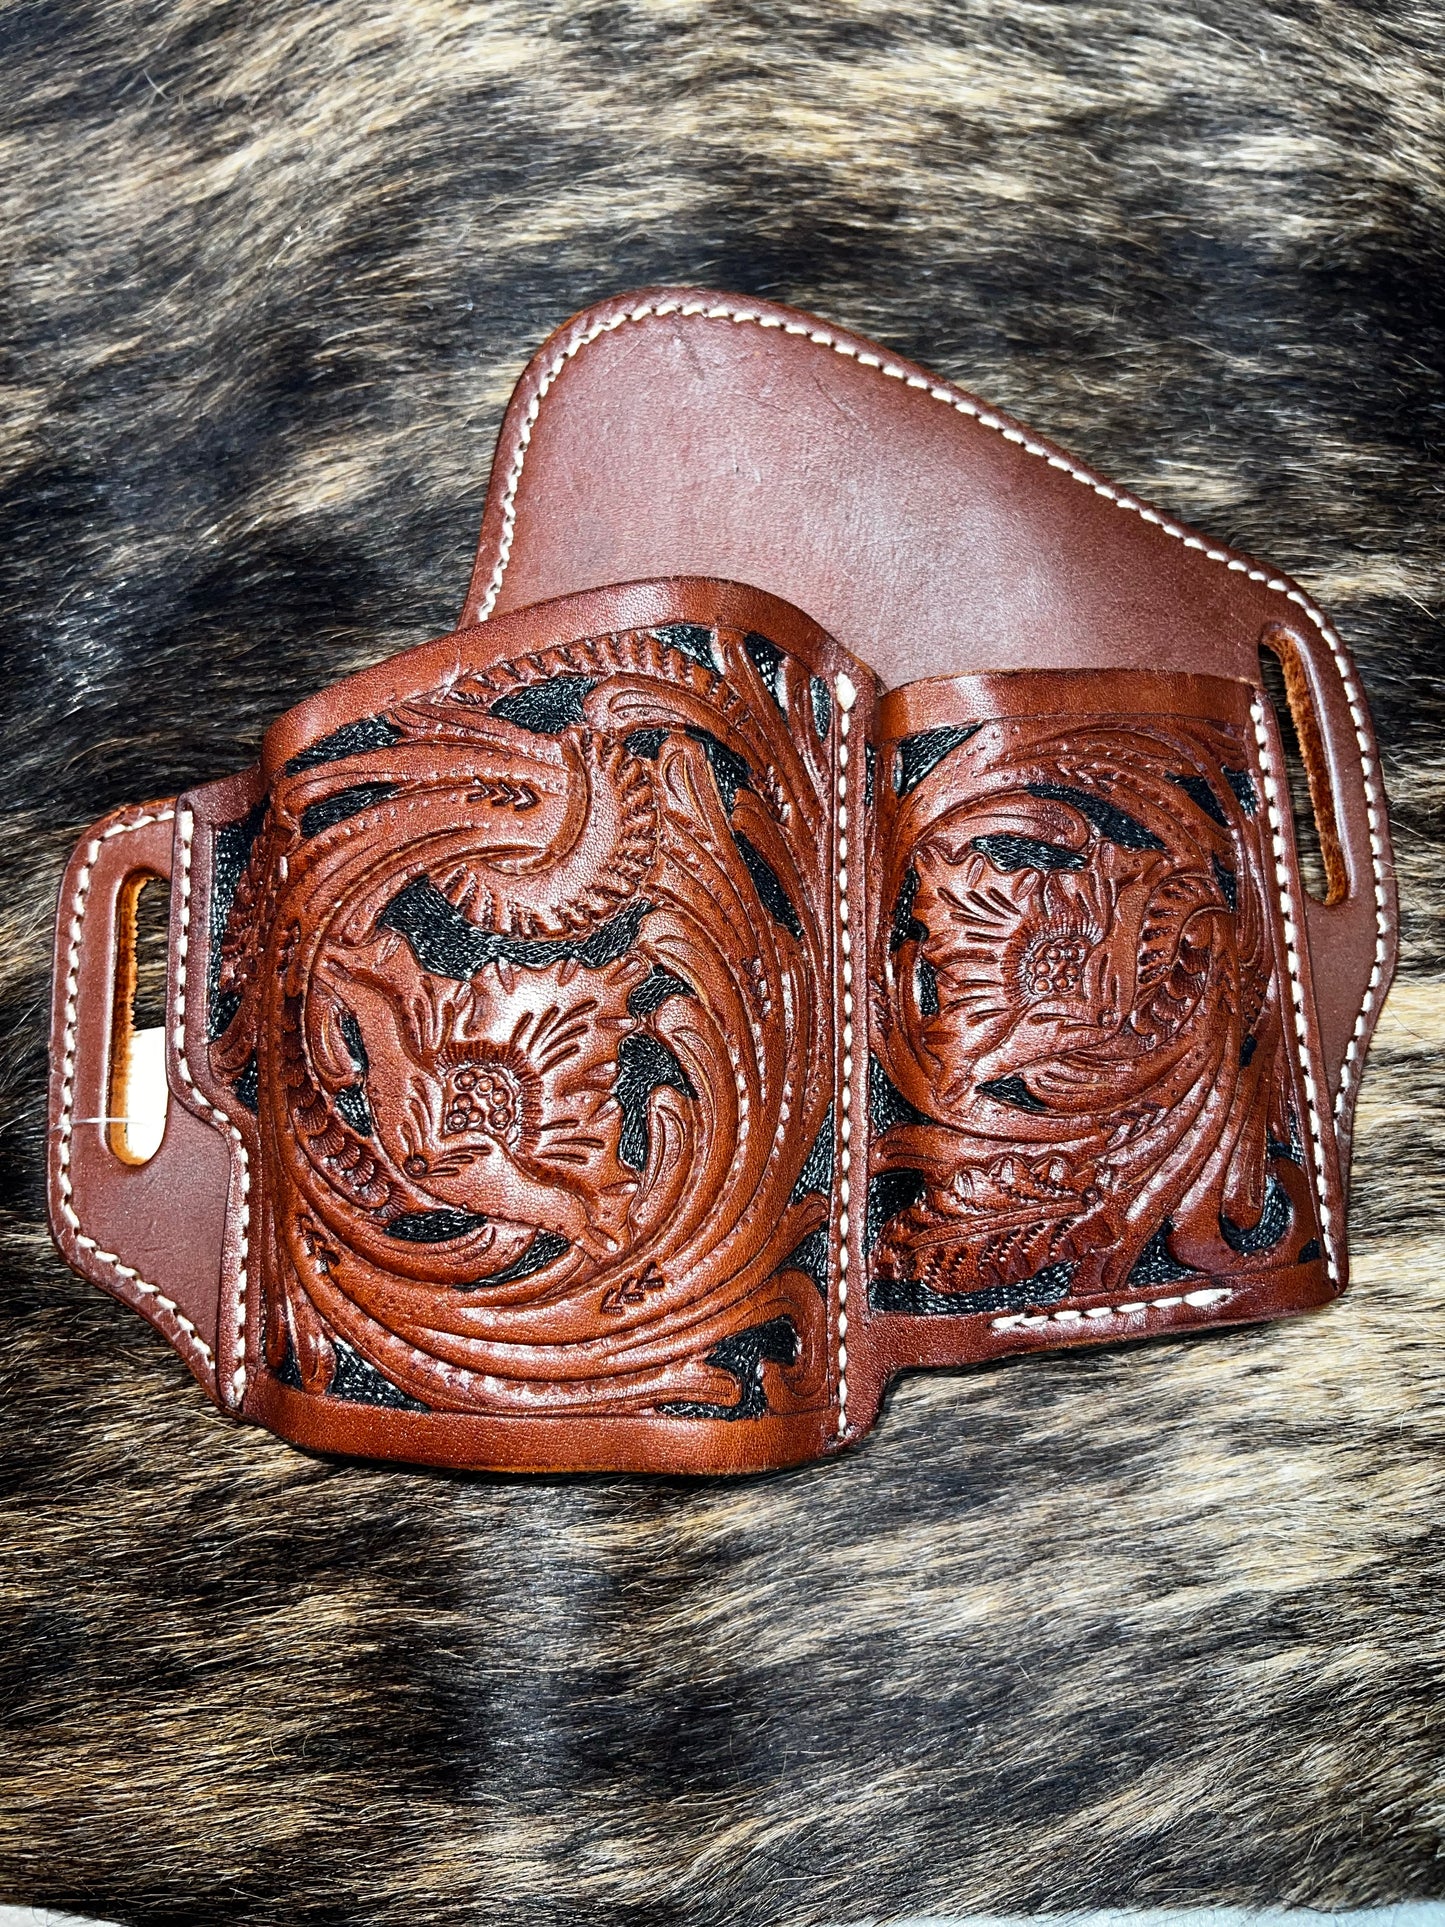 Tooled Leather Gun Holster and Magazine Pouch